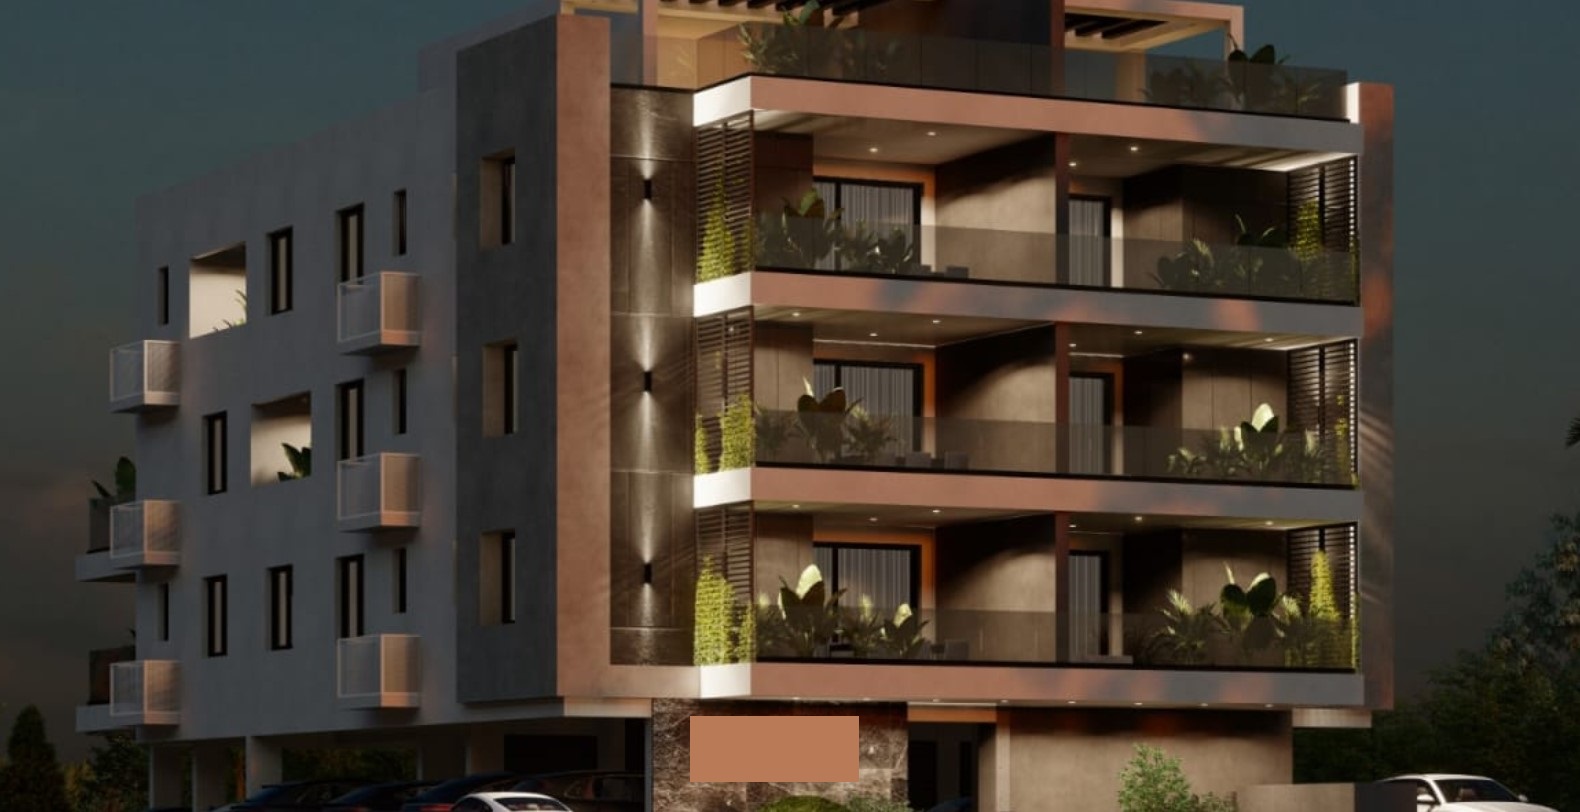 2 Bedroom Apartment for Sale in Aradippou, Larnaca District